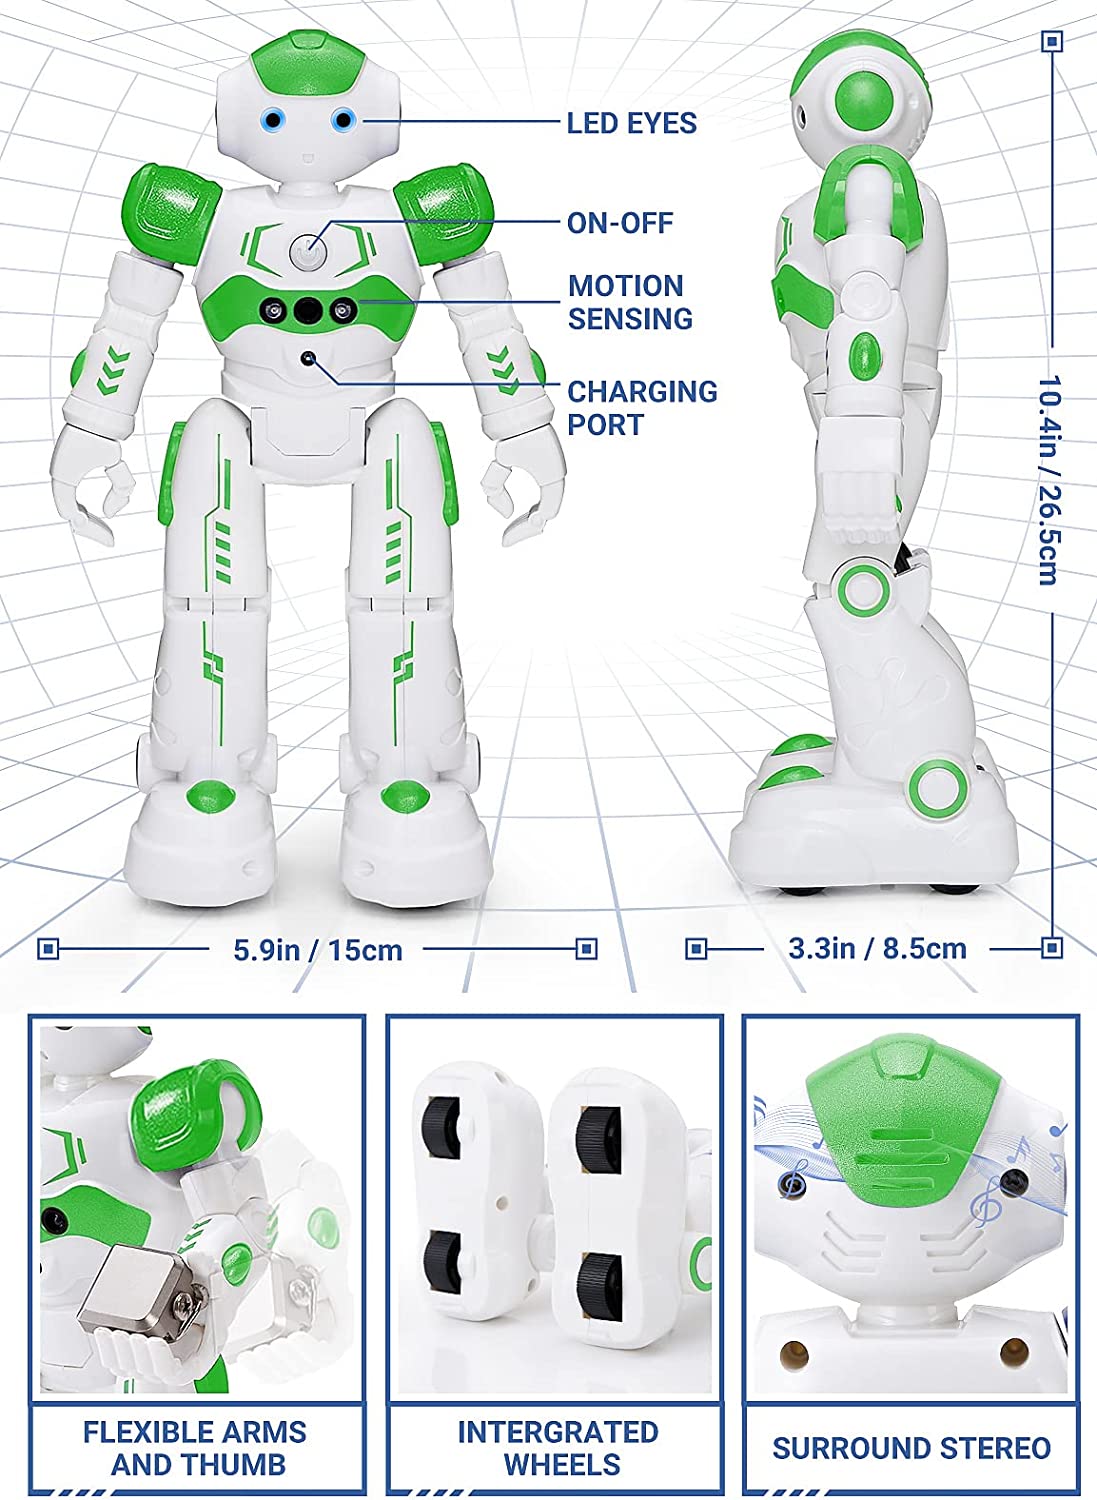 Detailed feature for a remote and hand controlled kids robot. Various features are pointed out which include; flexible arms and thumb, integrated wheels, surround stereo.